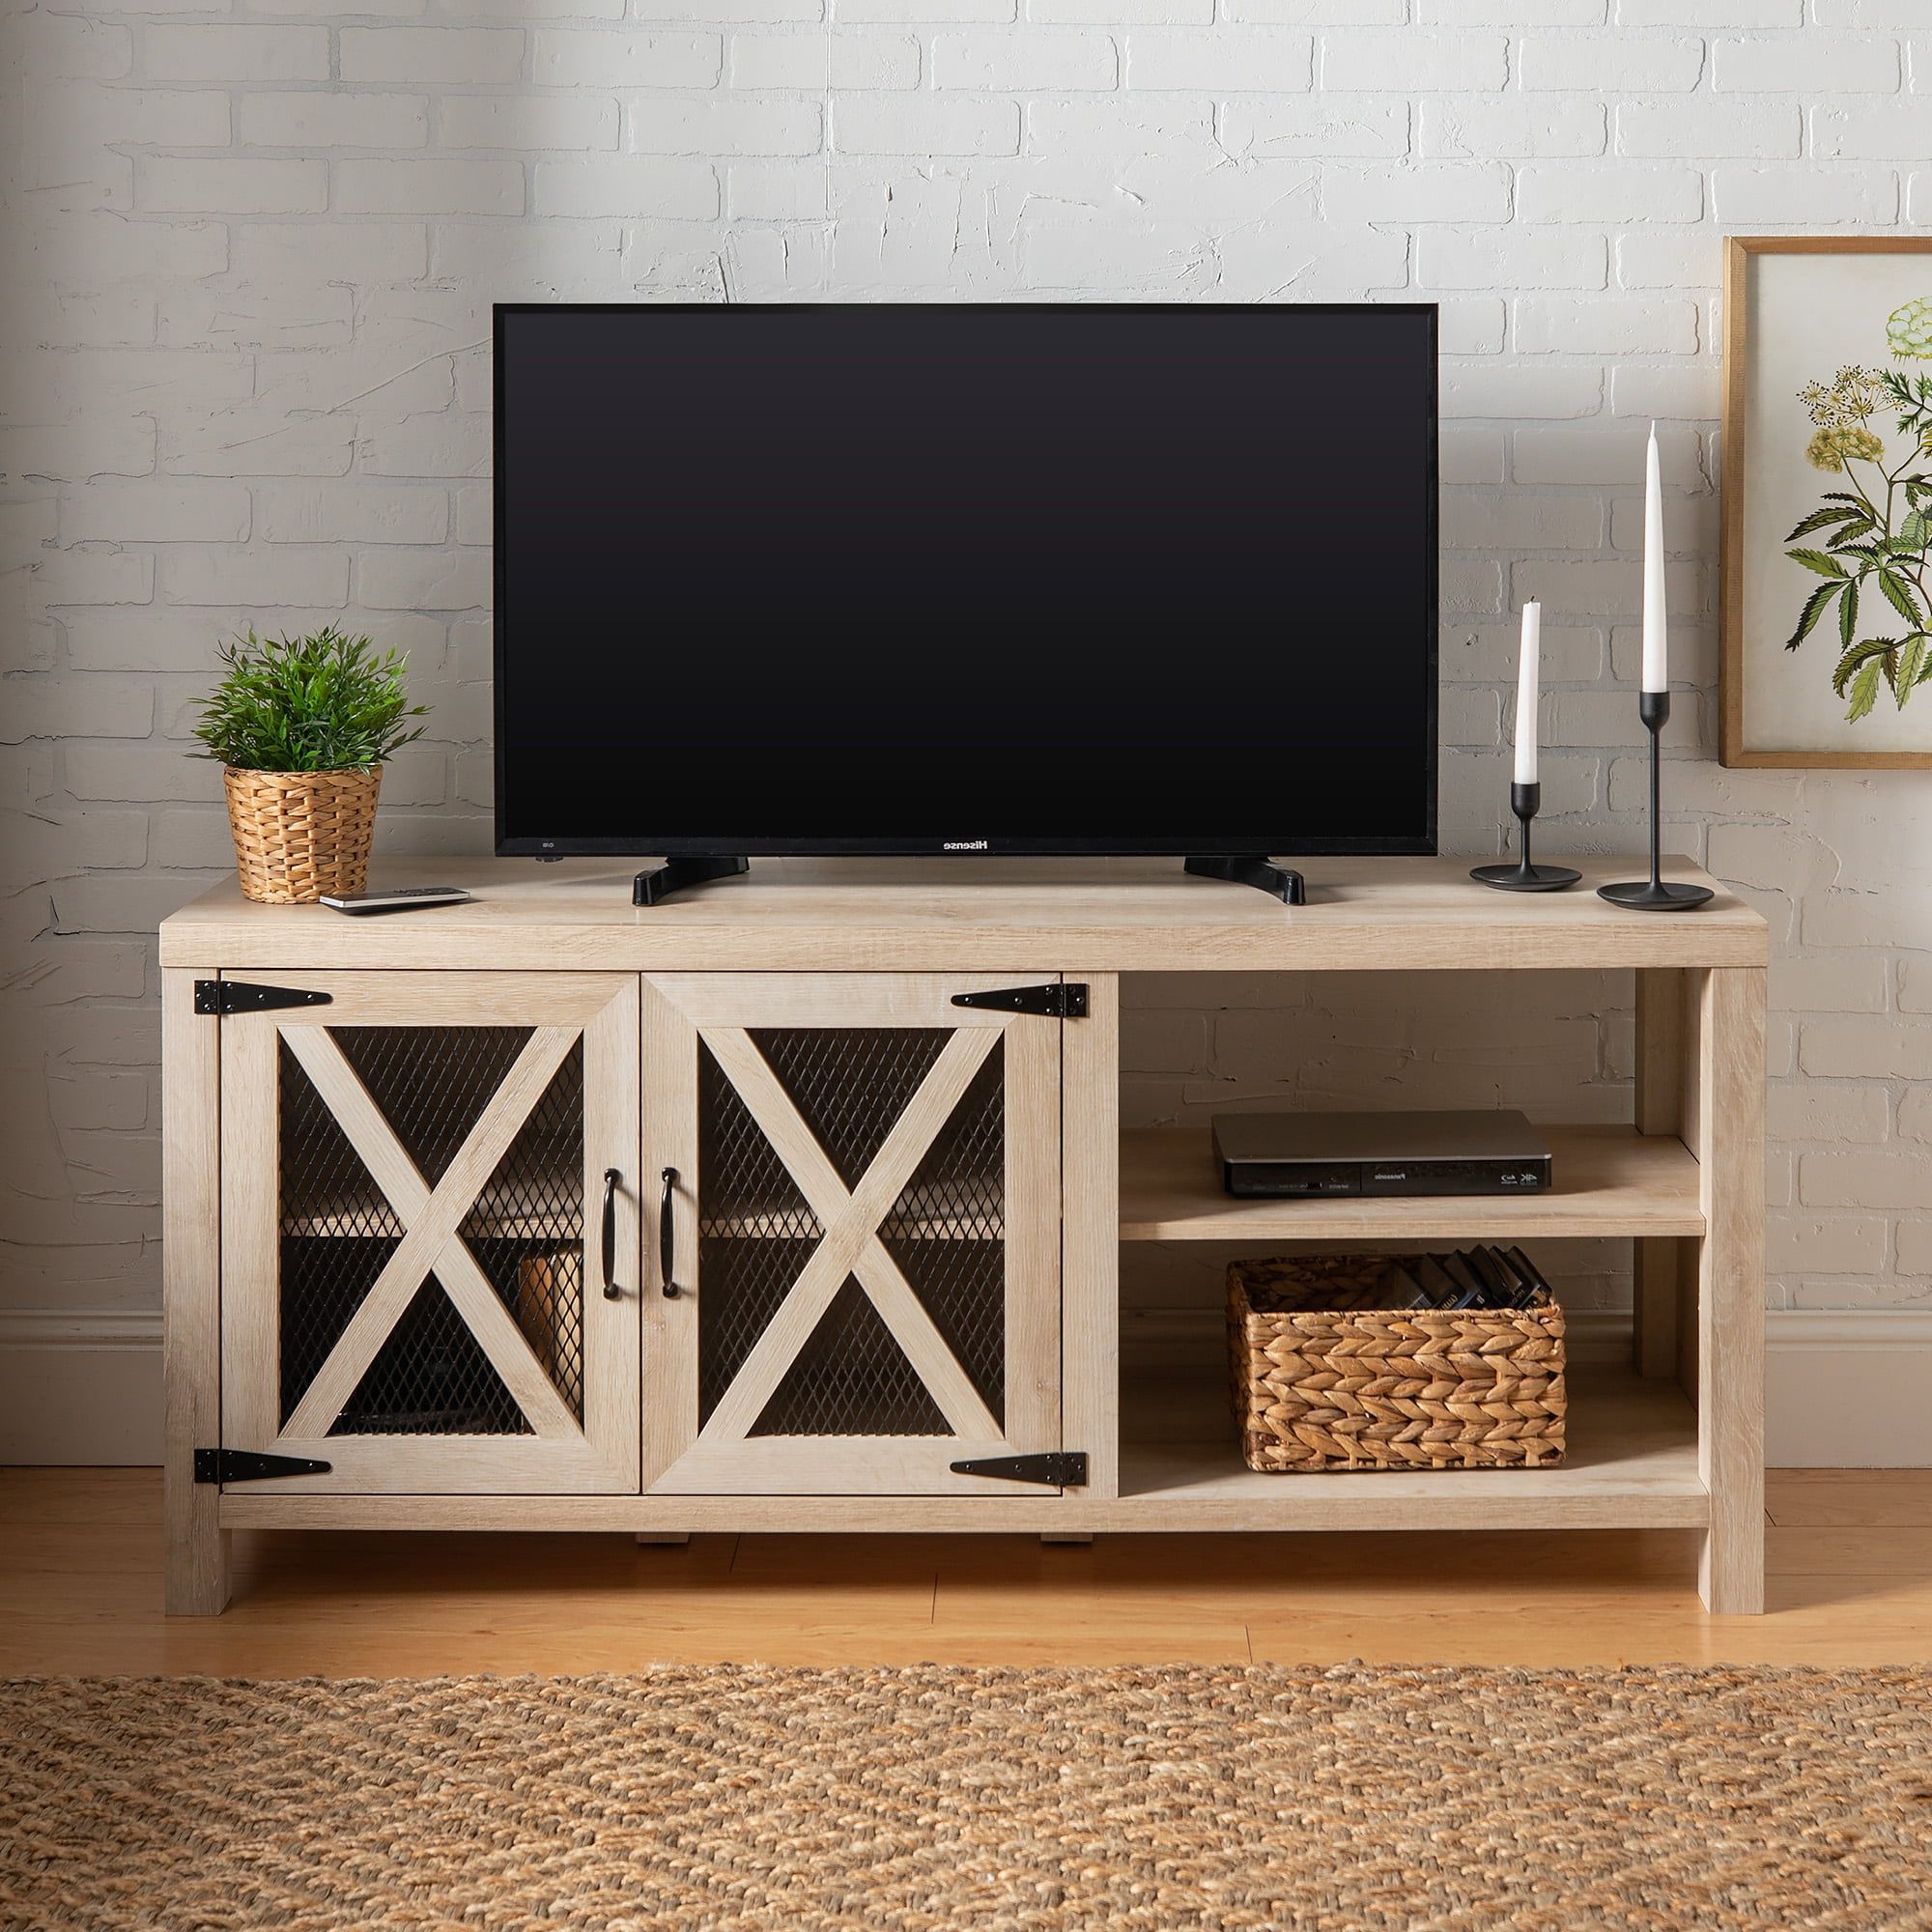 Manor Park Industrial Farmhouse Tv Stand For Tvs Up To 64" – White Oak Intended For Most Recently Released Farmhouse Tv Stands (View 3 of 15)